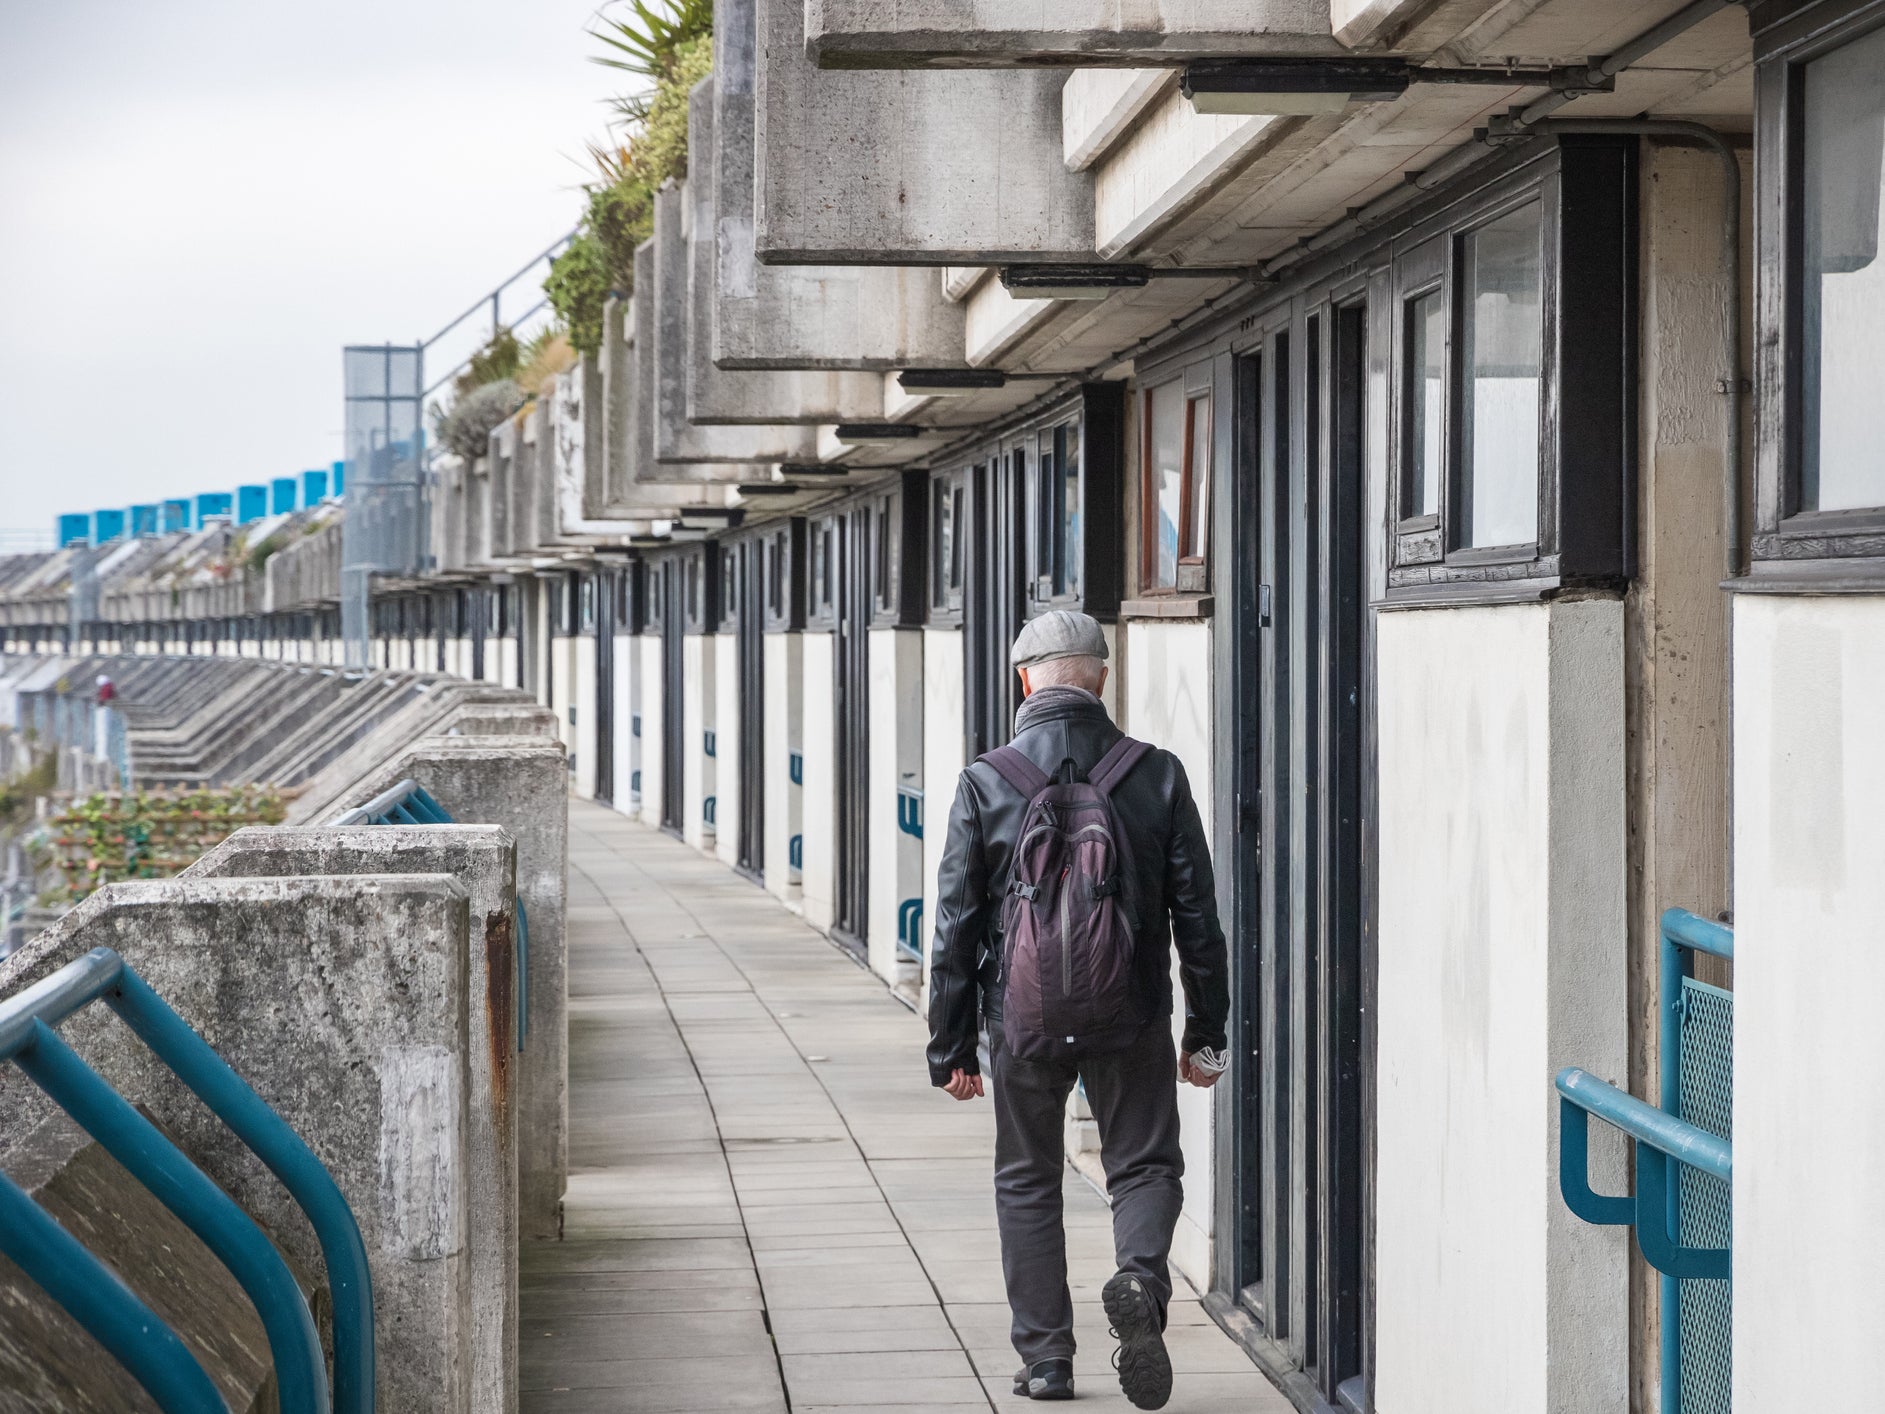 Alexandra Road estate in London. Cuts to budgets for social housing are blamed for chronic lack of housing and worsening levels of homelessness